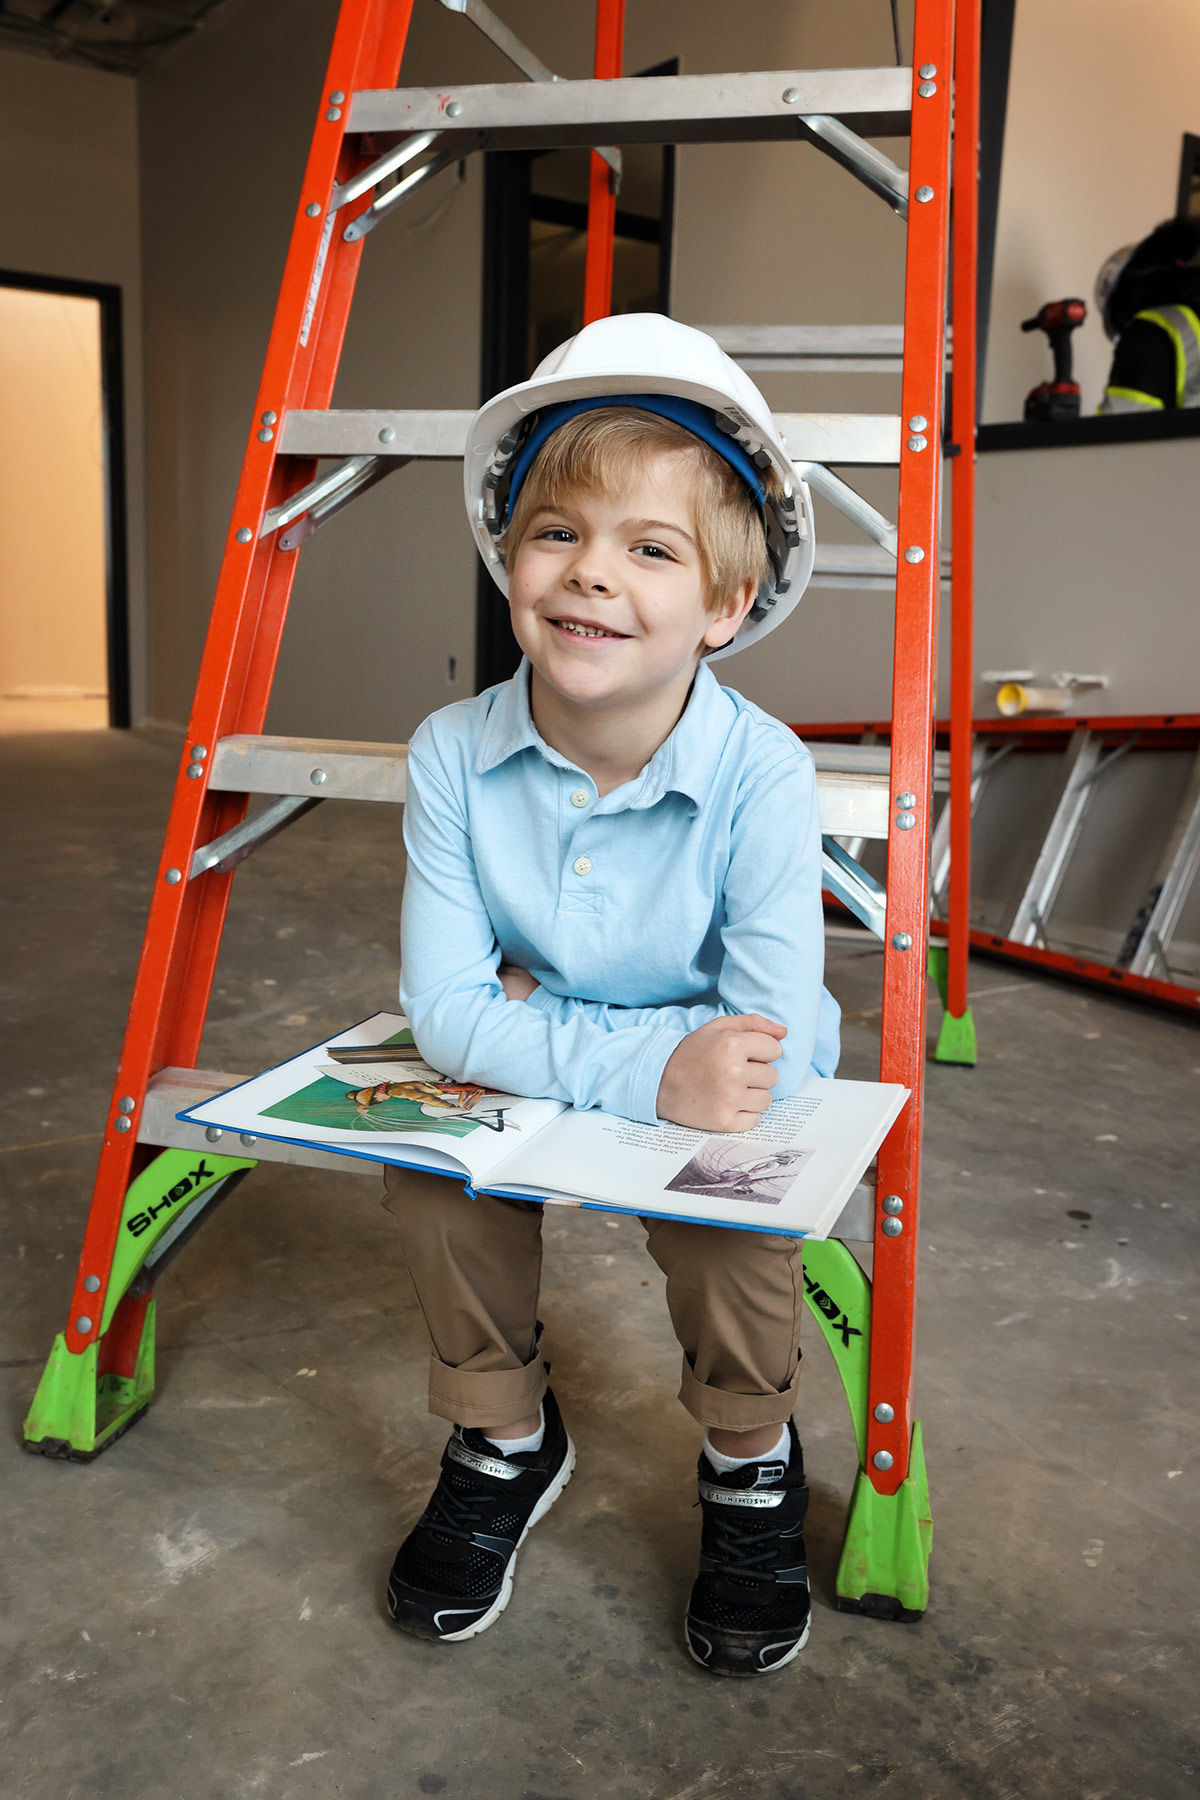 Child holding a book, sitting on a ladder.